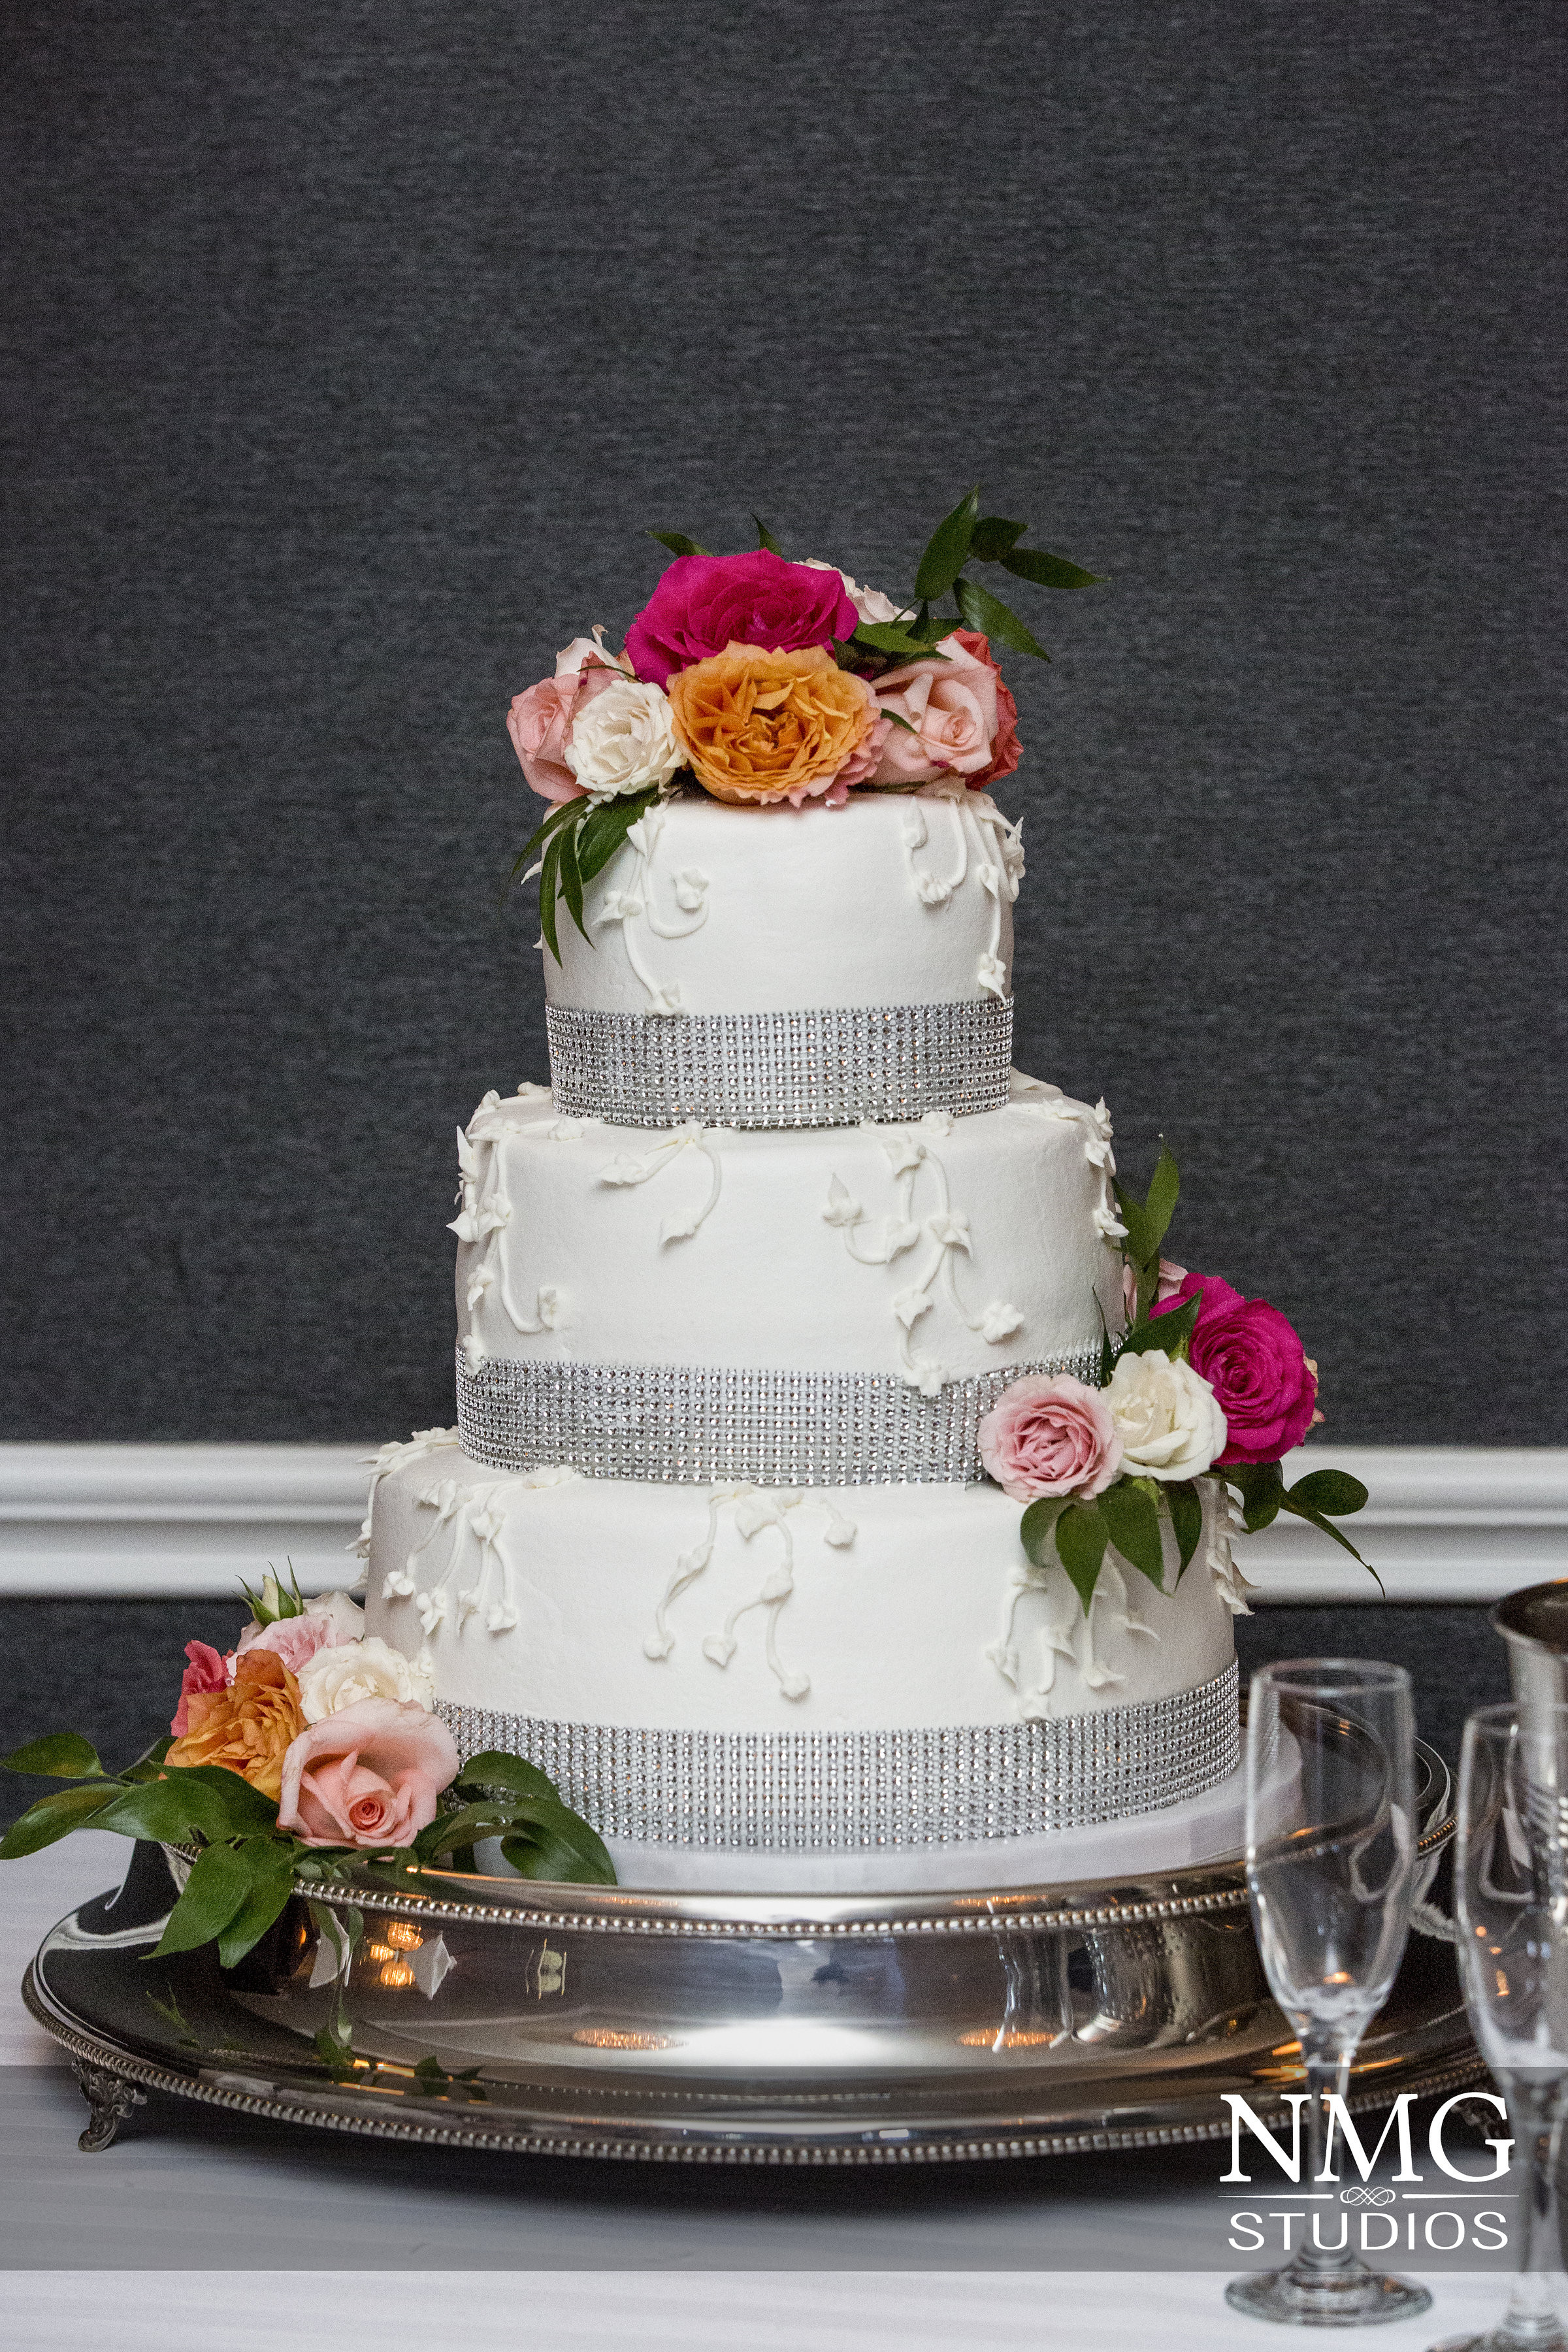 Show Me Pictures Of Wedding Cakes
 Show me your 3 tier wedding cakes